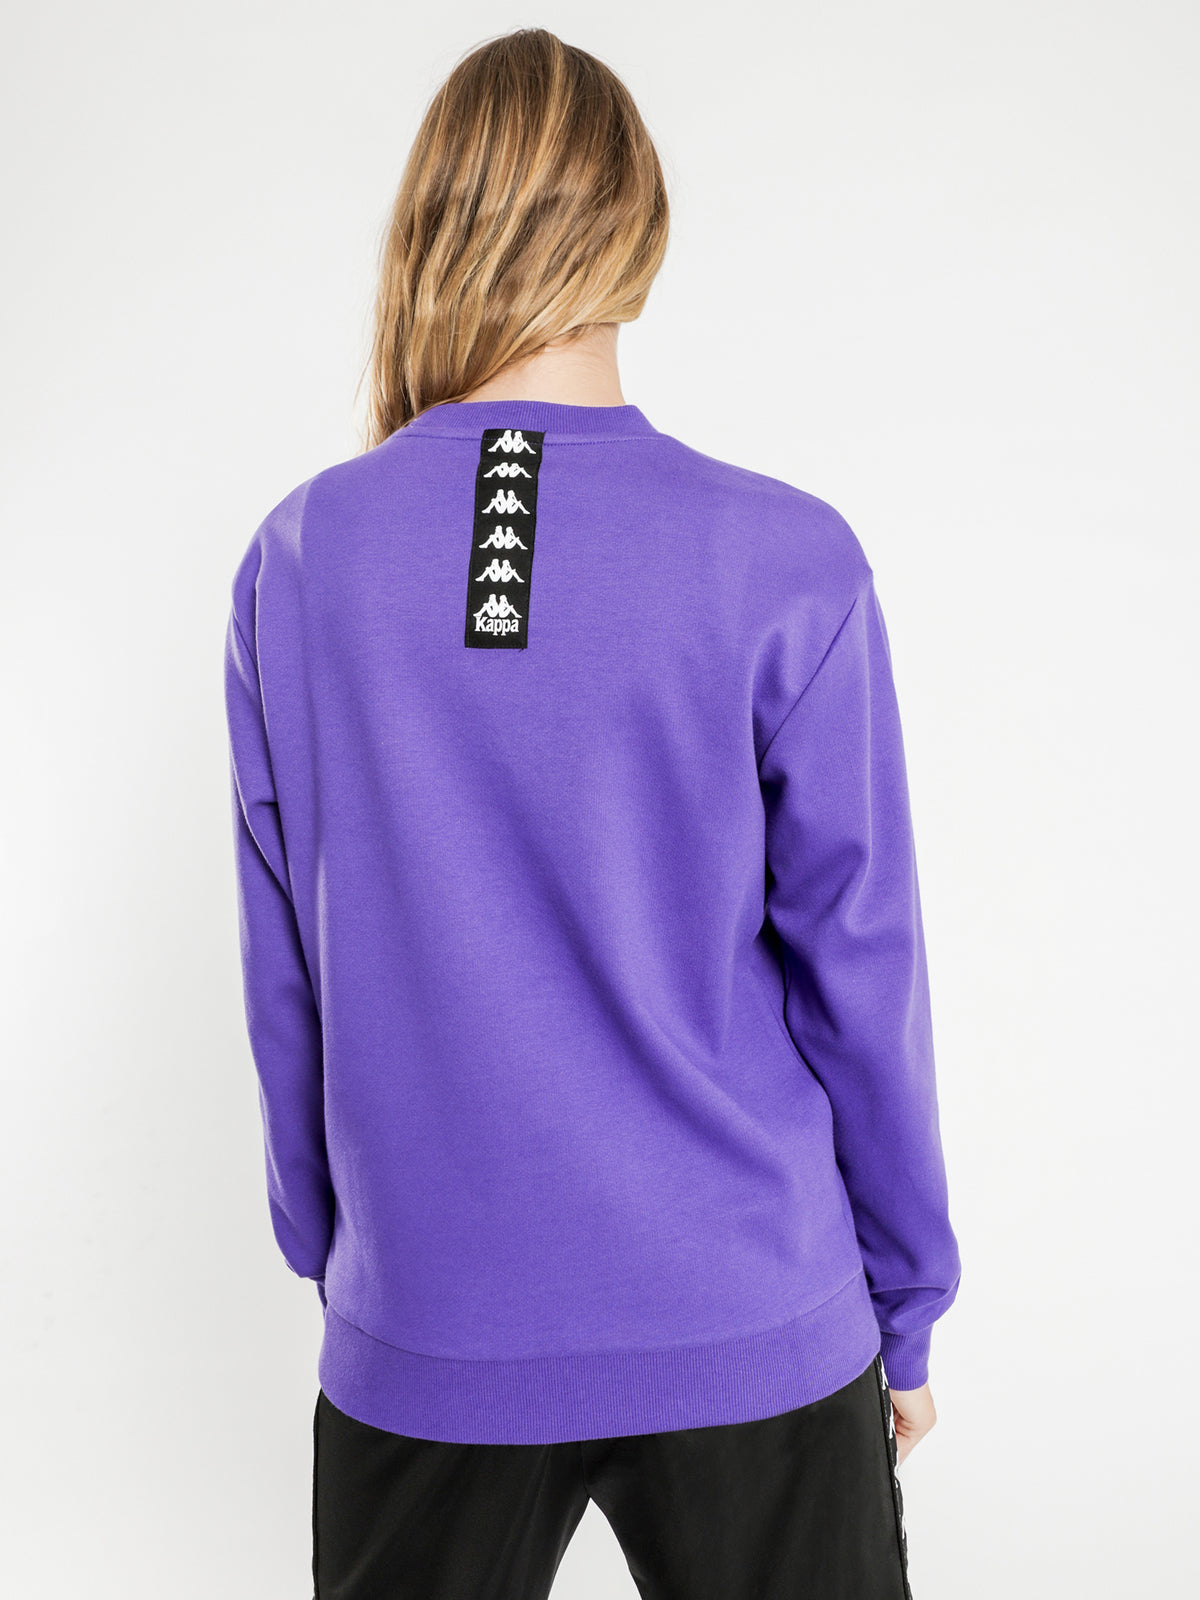 Authentic 222 Banda Sweater in Violet